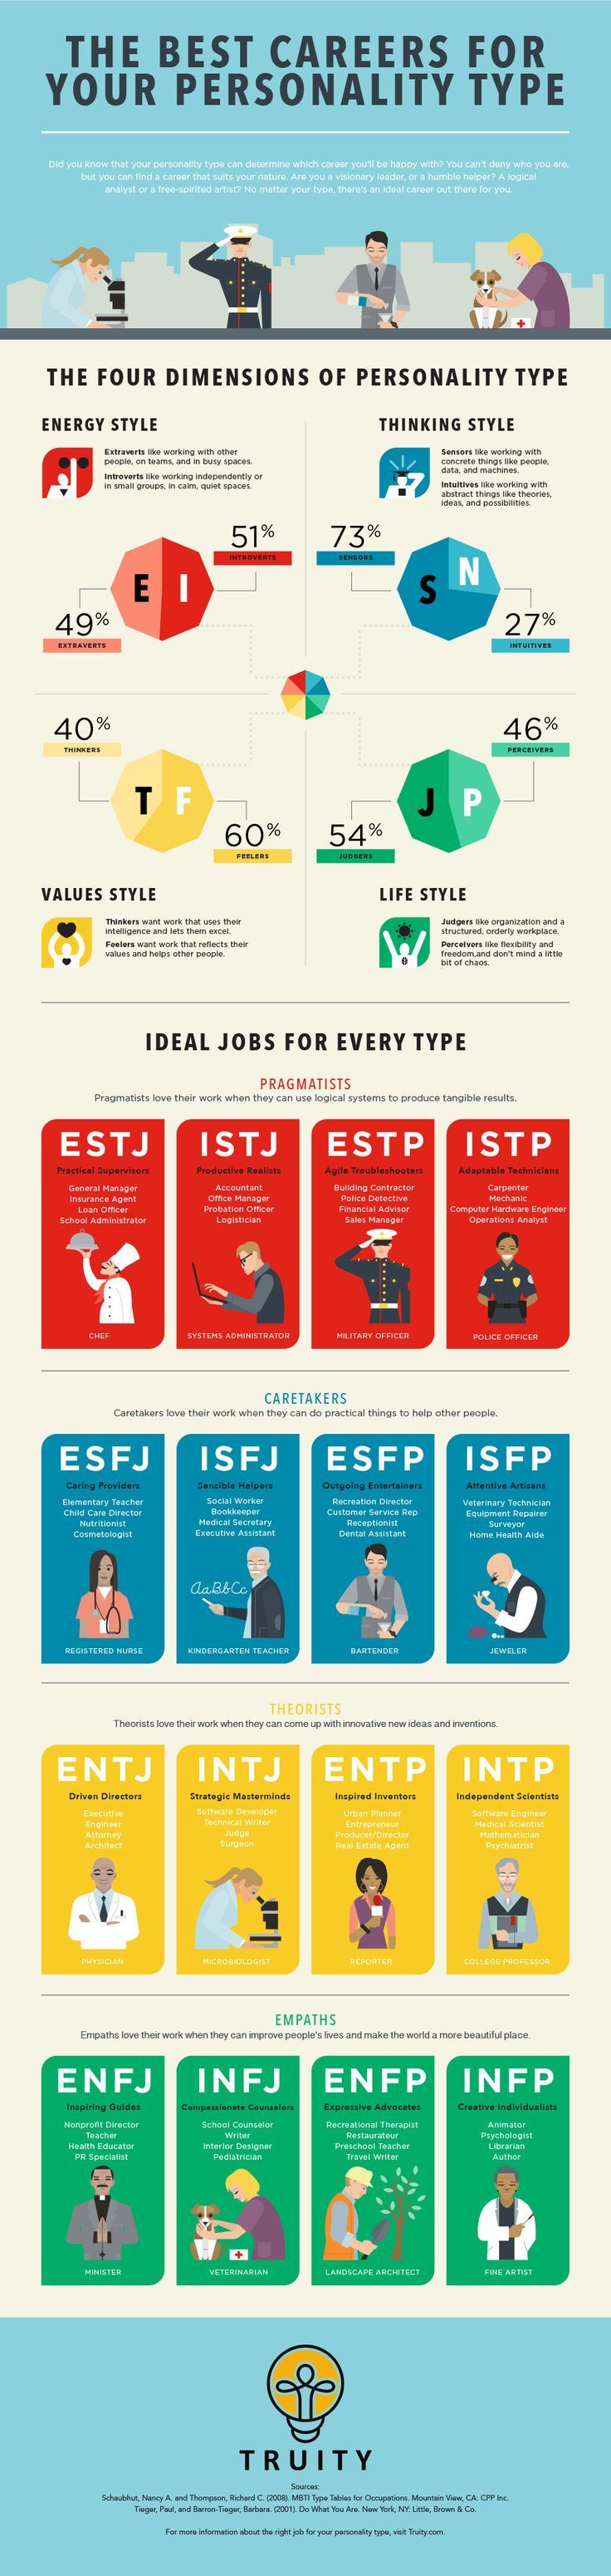 1556644784_147_Infographic-The-Best-Careers-for-Your-Personality-Type-Infographic Infographic : The Best Careers for Your Personality Type (Infographic)